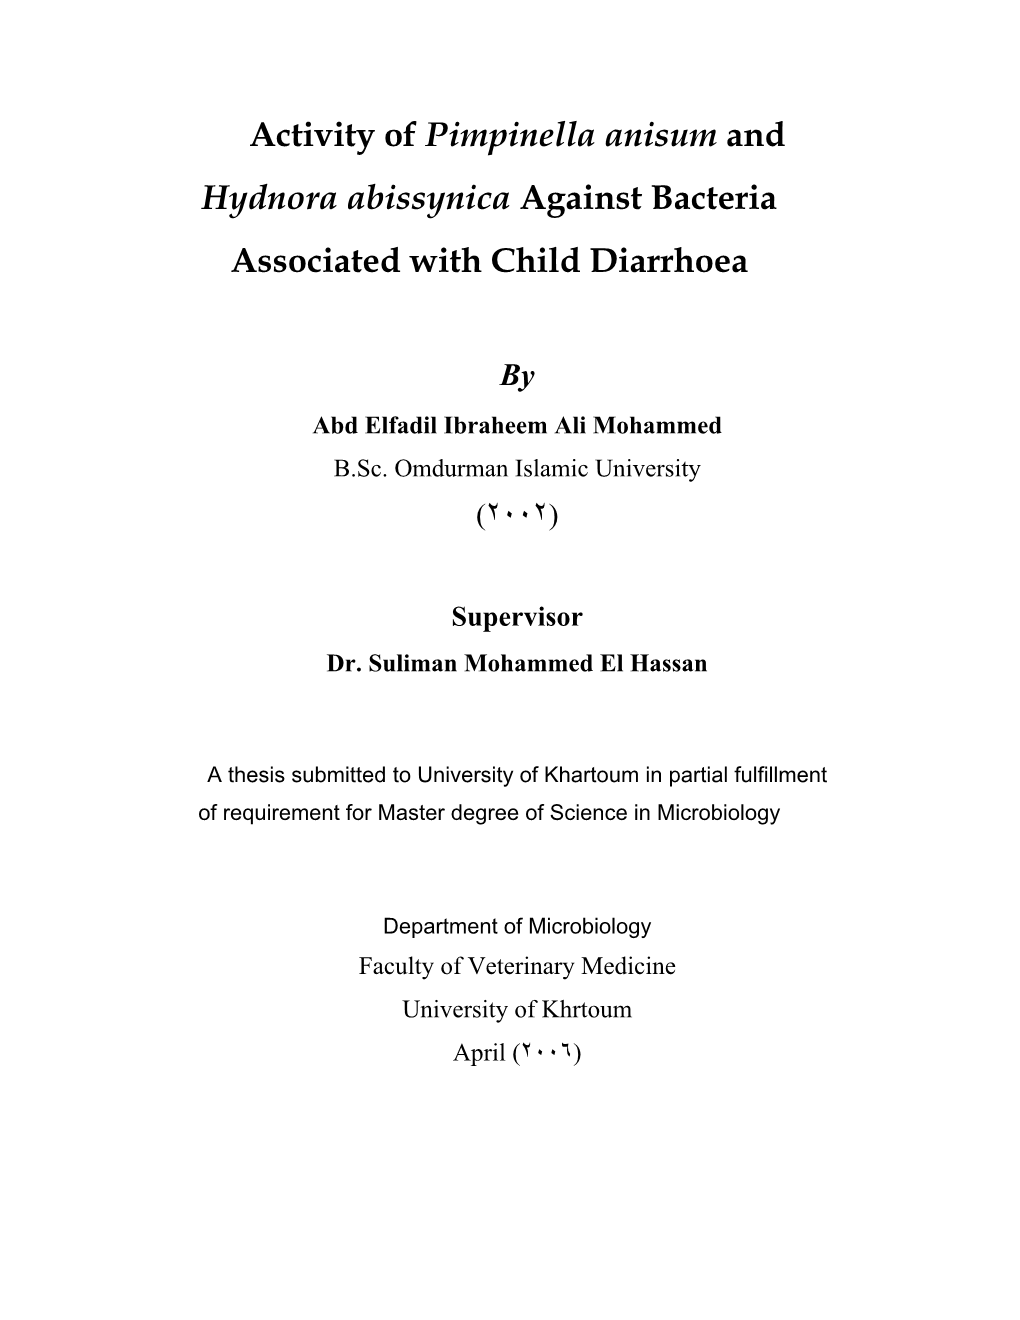 Activity of Pimpinella Anisum and Hydnora Abissynica Against Bacteria Associated with Child Diarrhoea